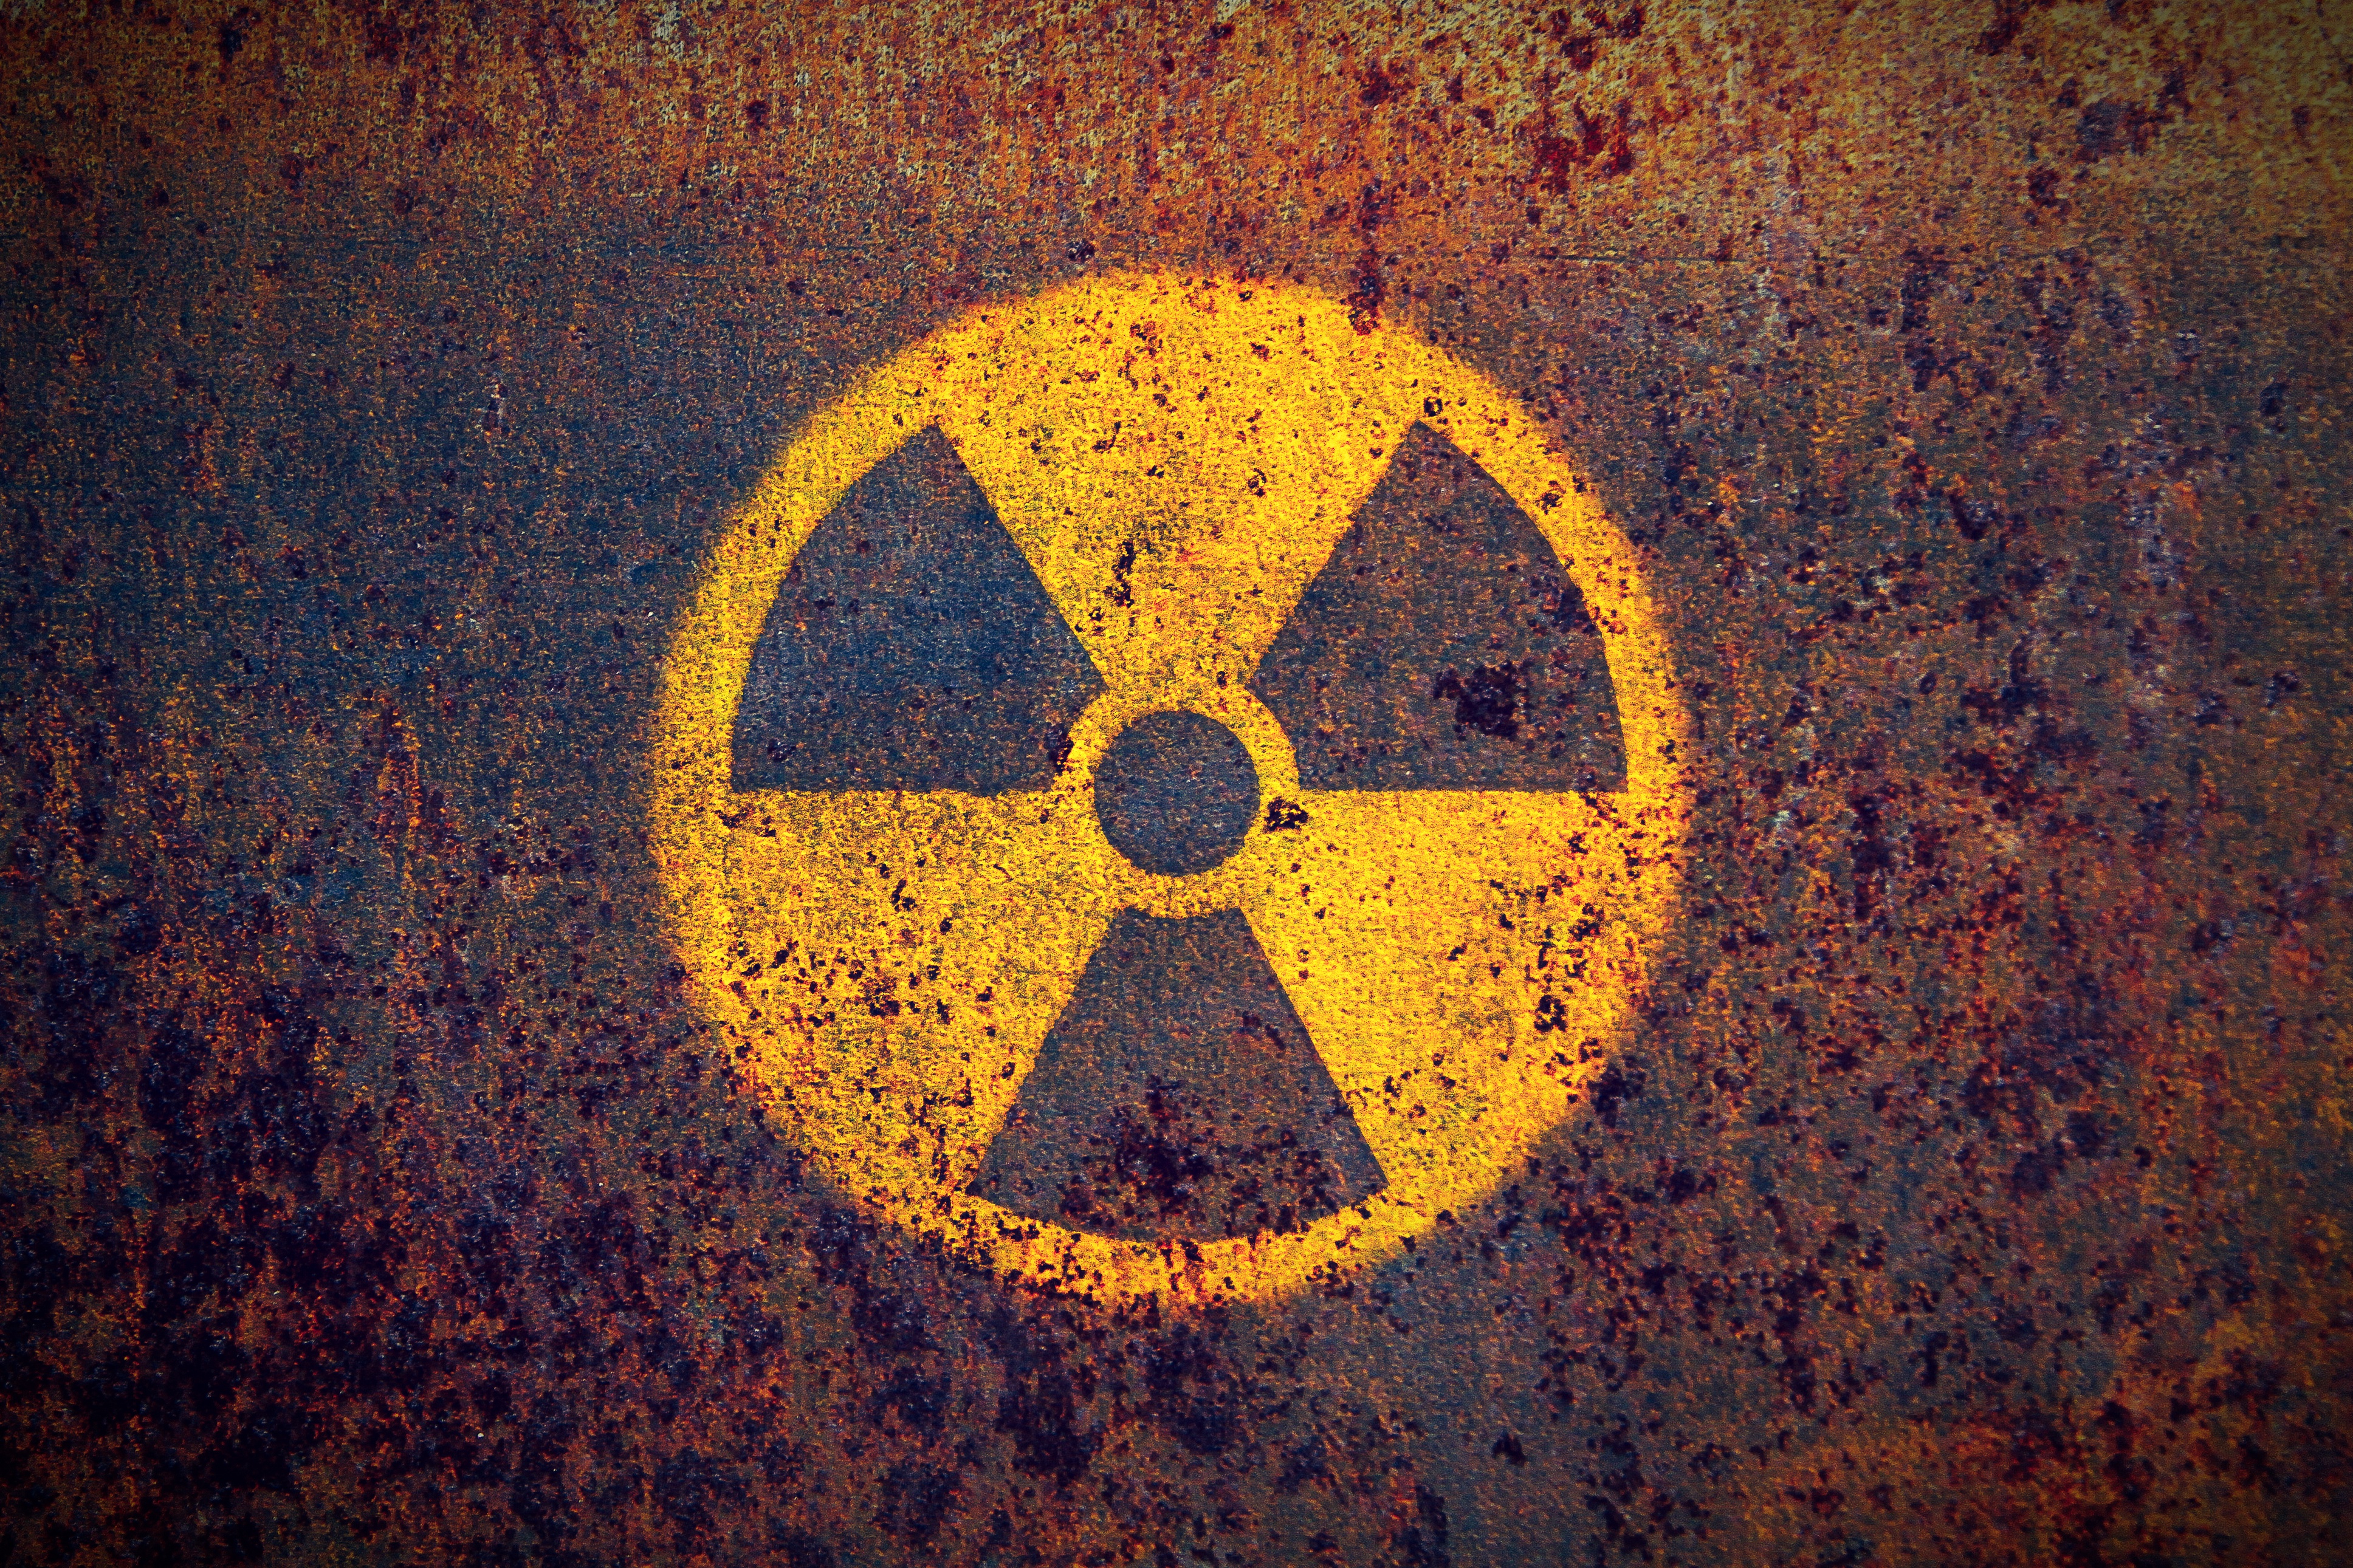 Green Nuclear Symbol Wallpapers